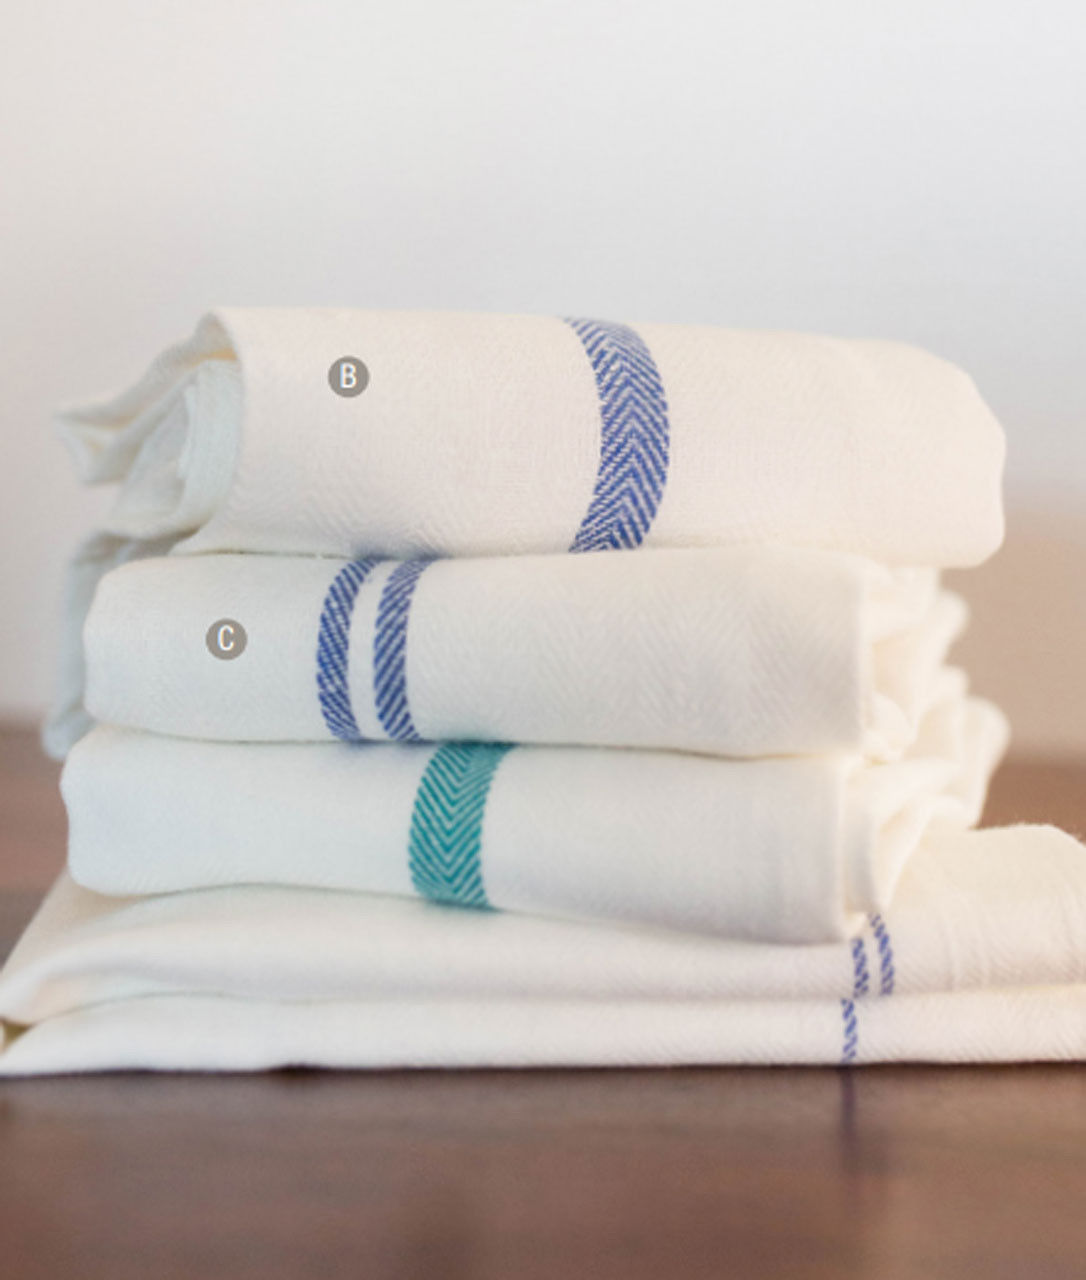 Are these 100 percent cotton kitchen towels long-lasting?